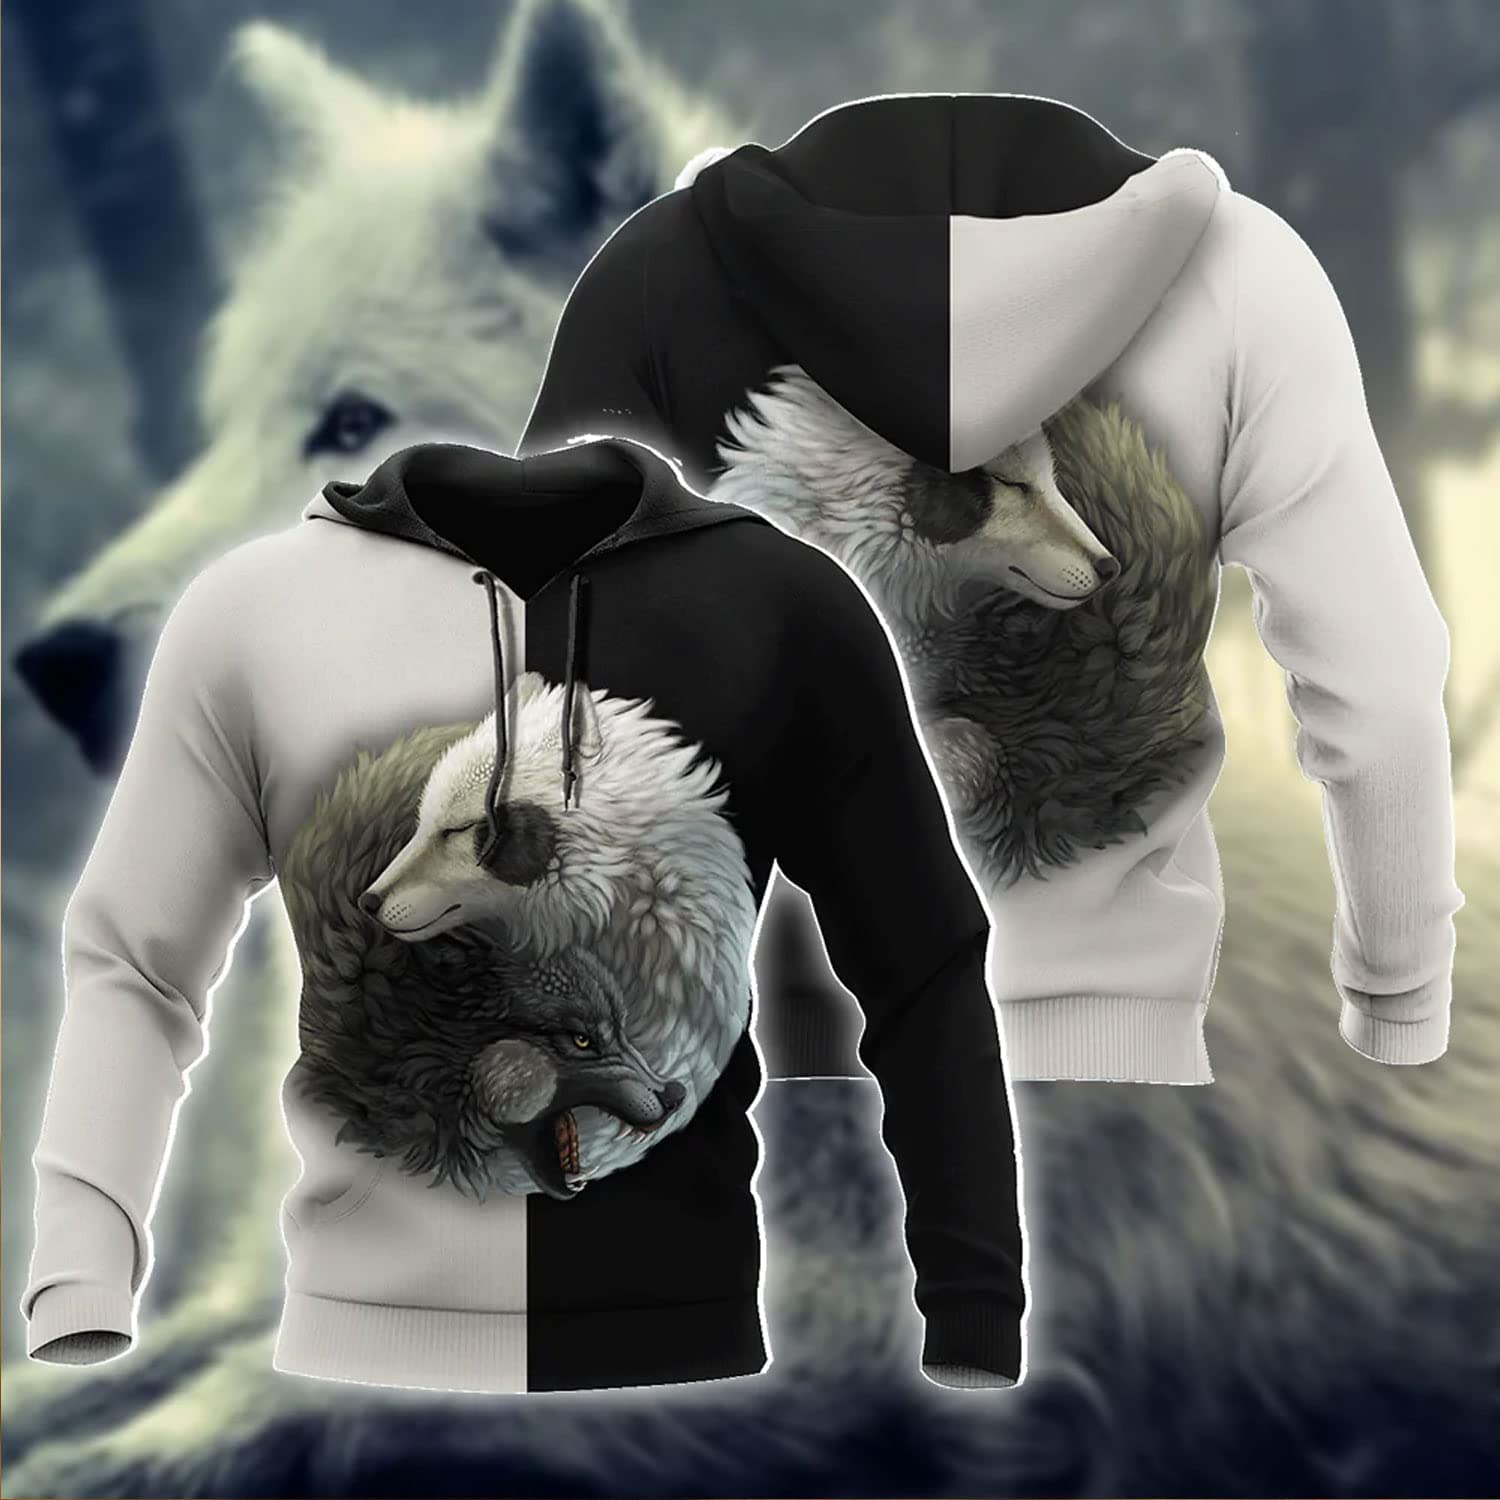 wolf yin %26 yang 3d hoodie with all over print perfect for winter and wolf lovers ideal gift for hunting enthusiasts and family available in pullover hoodie hawaiian shirt and sweatshirt varian deklx